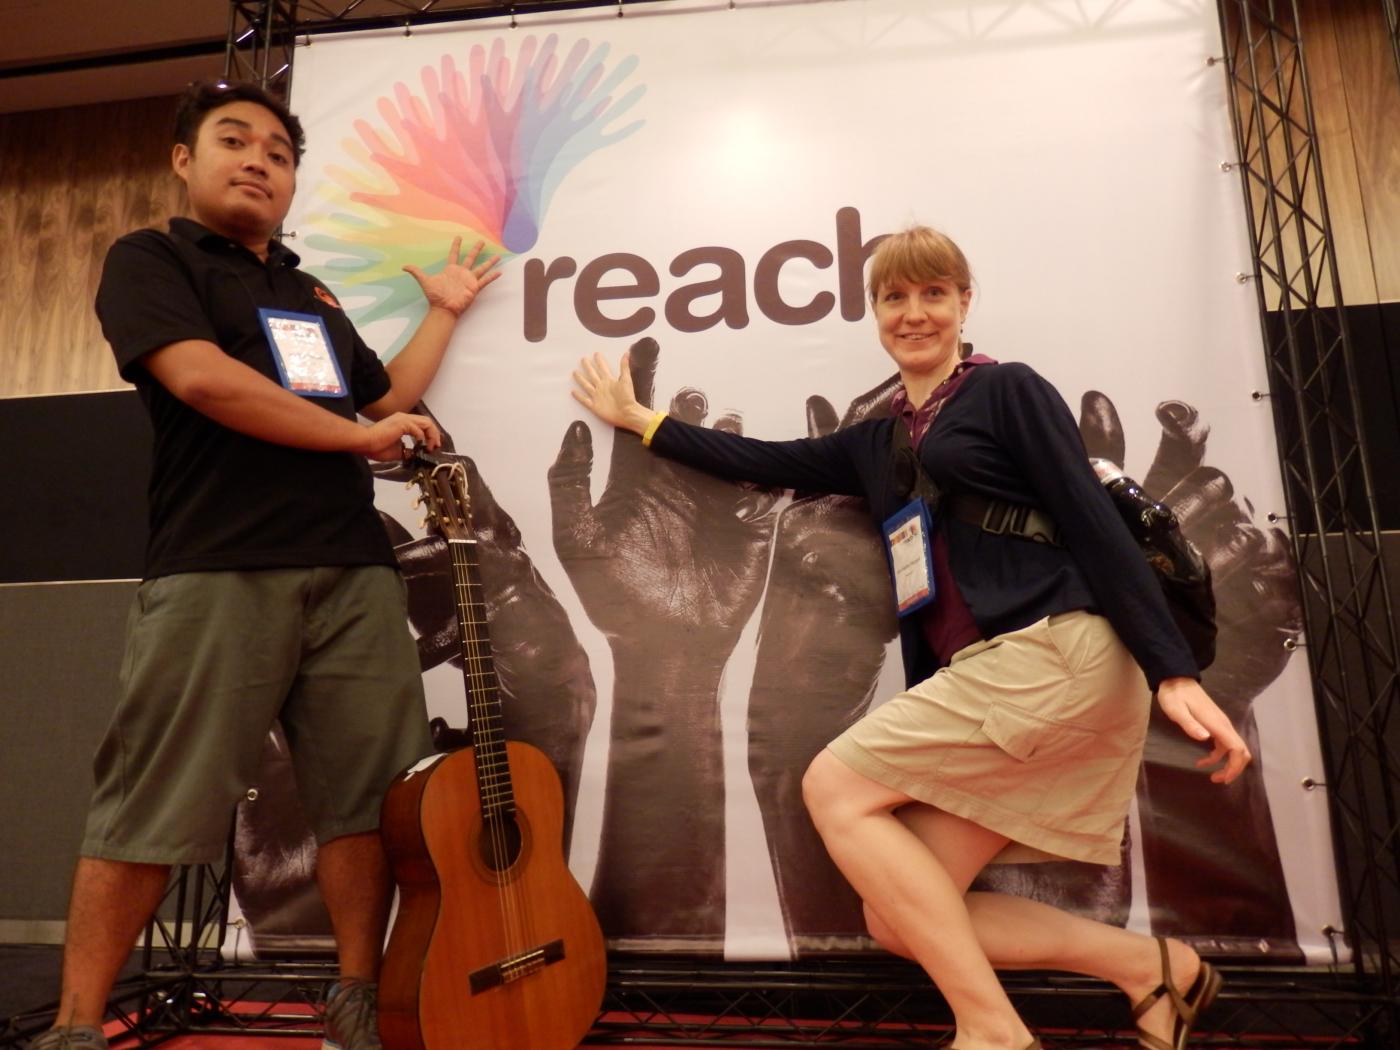 From left: Jec Borlado and Ann Katrin Hergert at the Baptist Youth World Conference in Singapore. © Jeanne Huracek